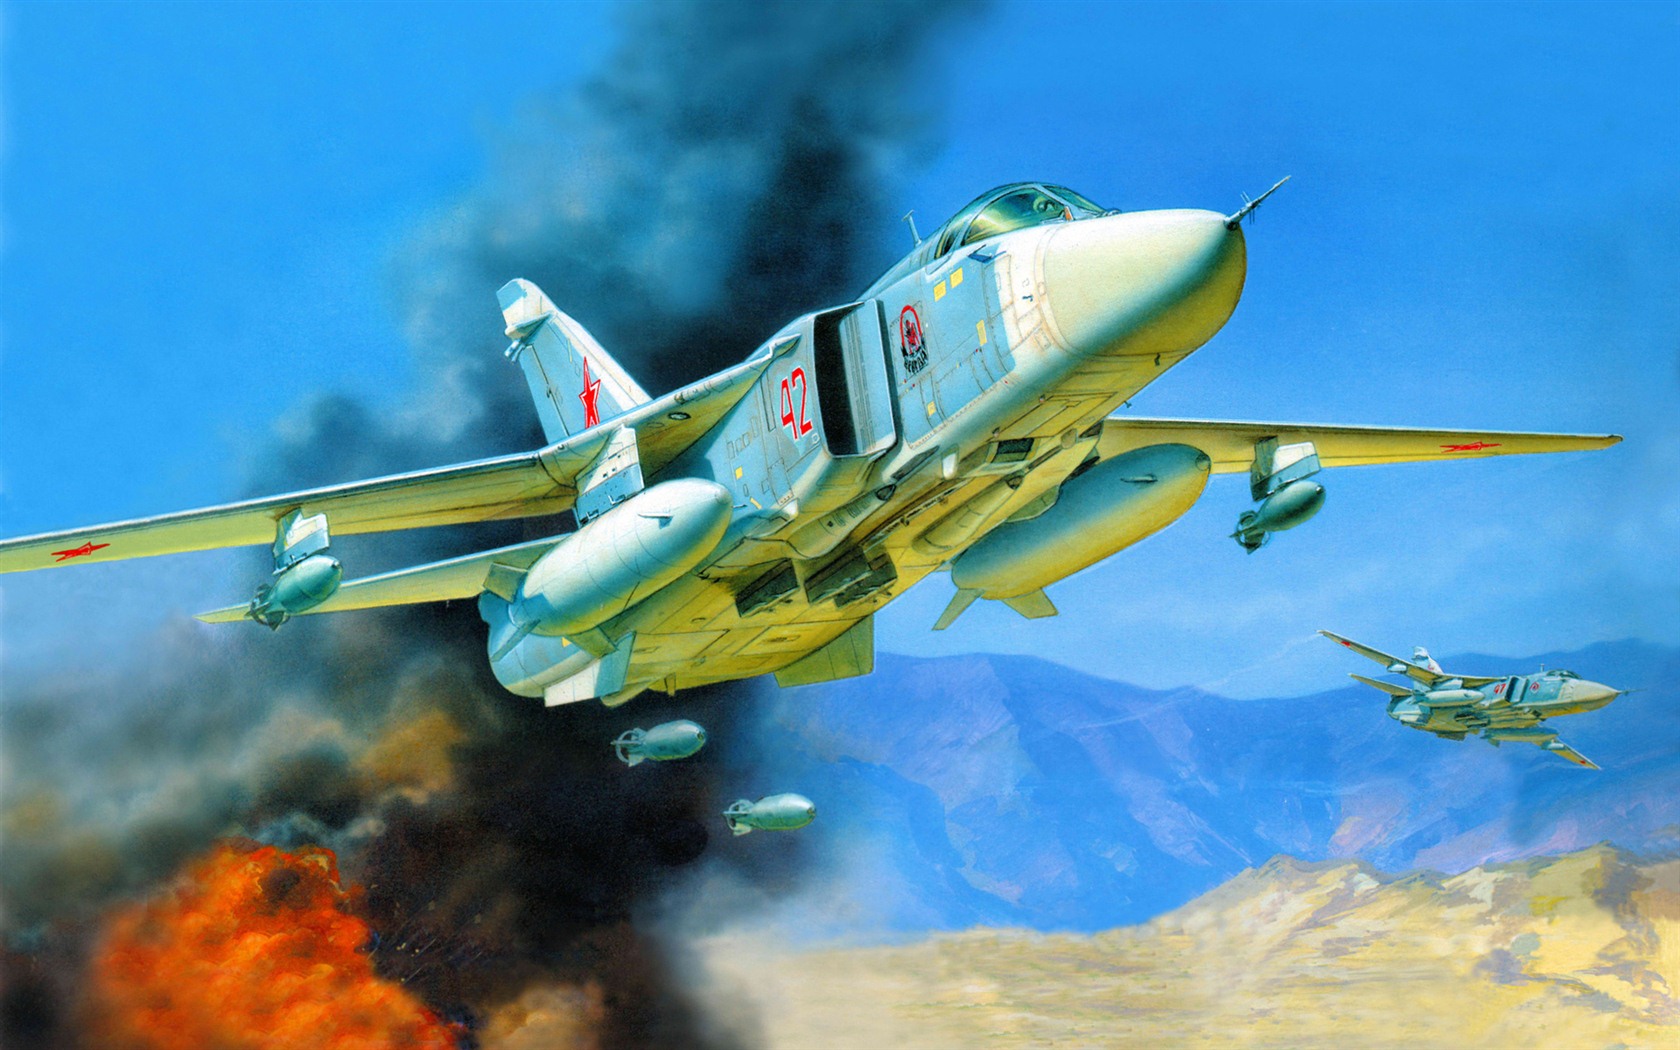 Military aircraft flight exquisite painting wallpapers #3 - 1680x1050